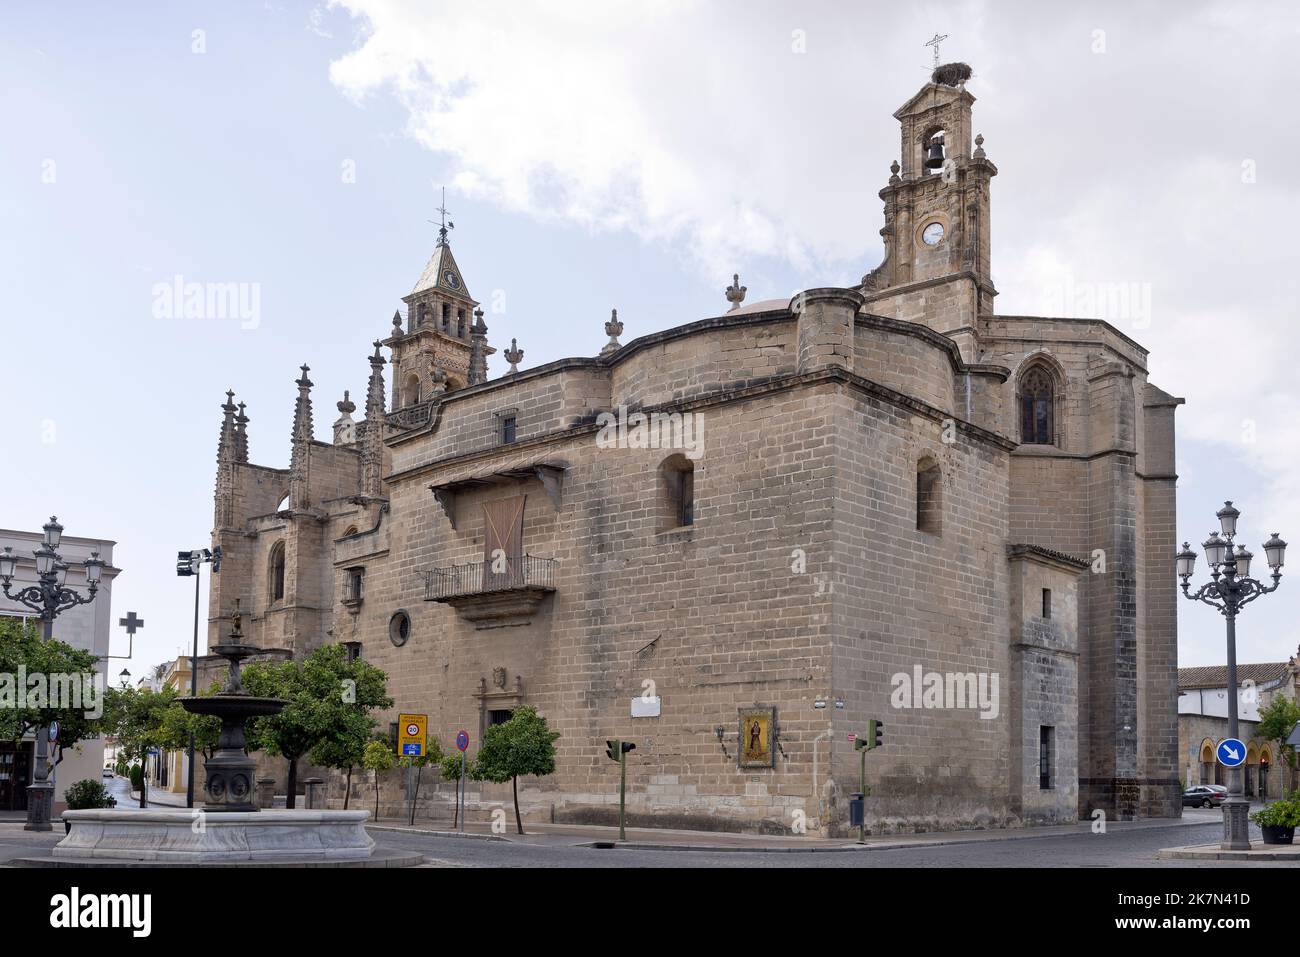 One of the many churches in Jerez de la Frontera, Andalusia, Spain Stock Photo